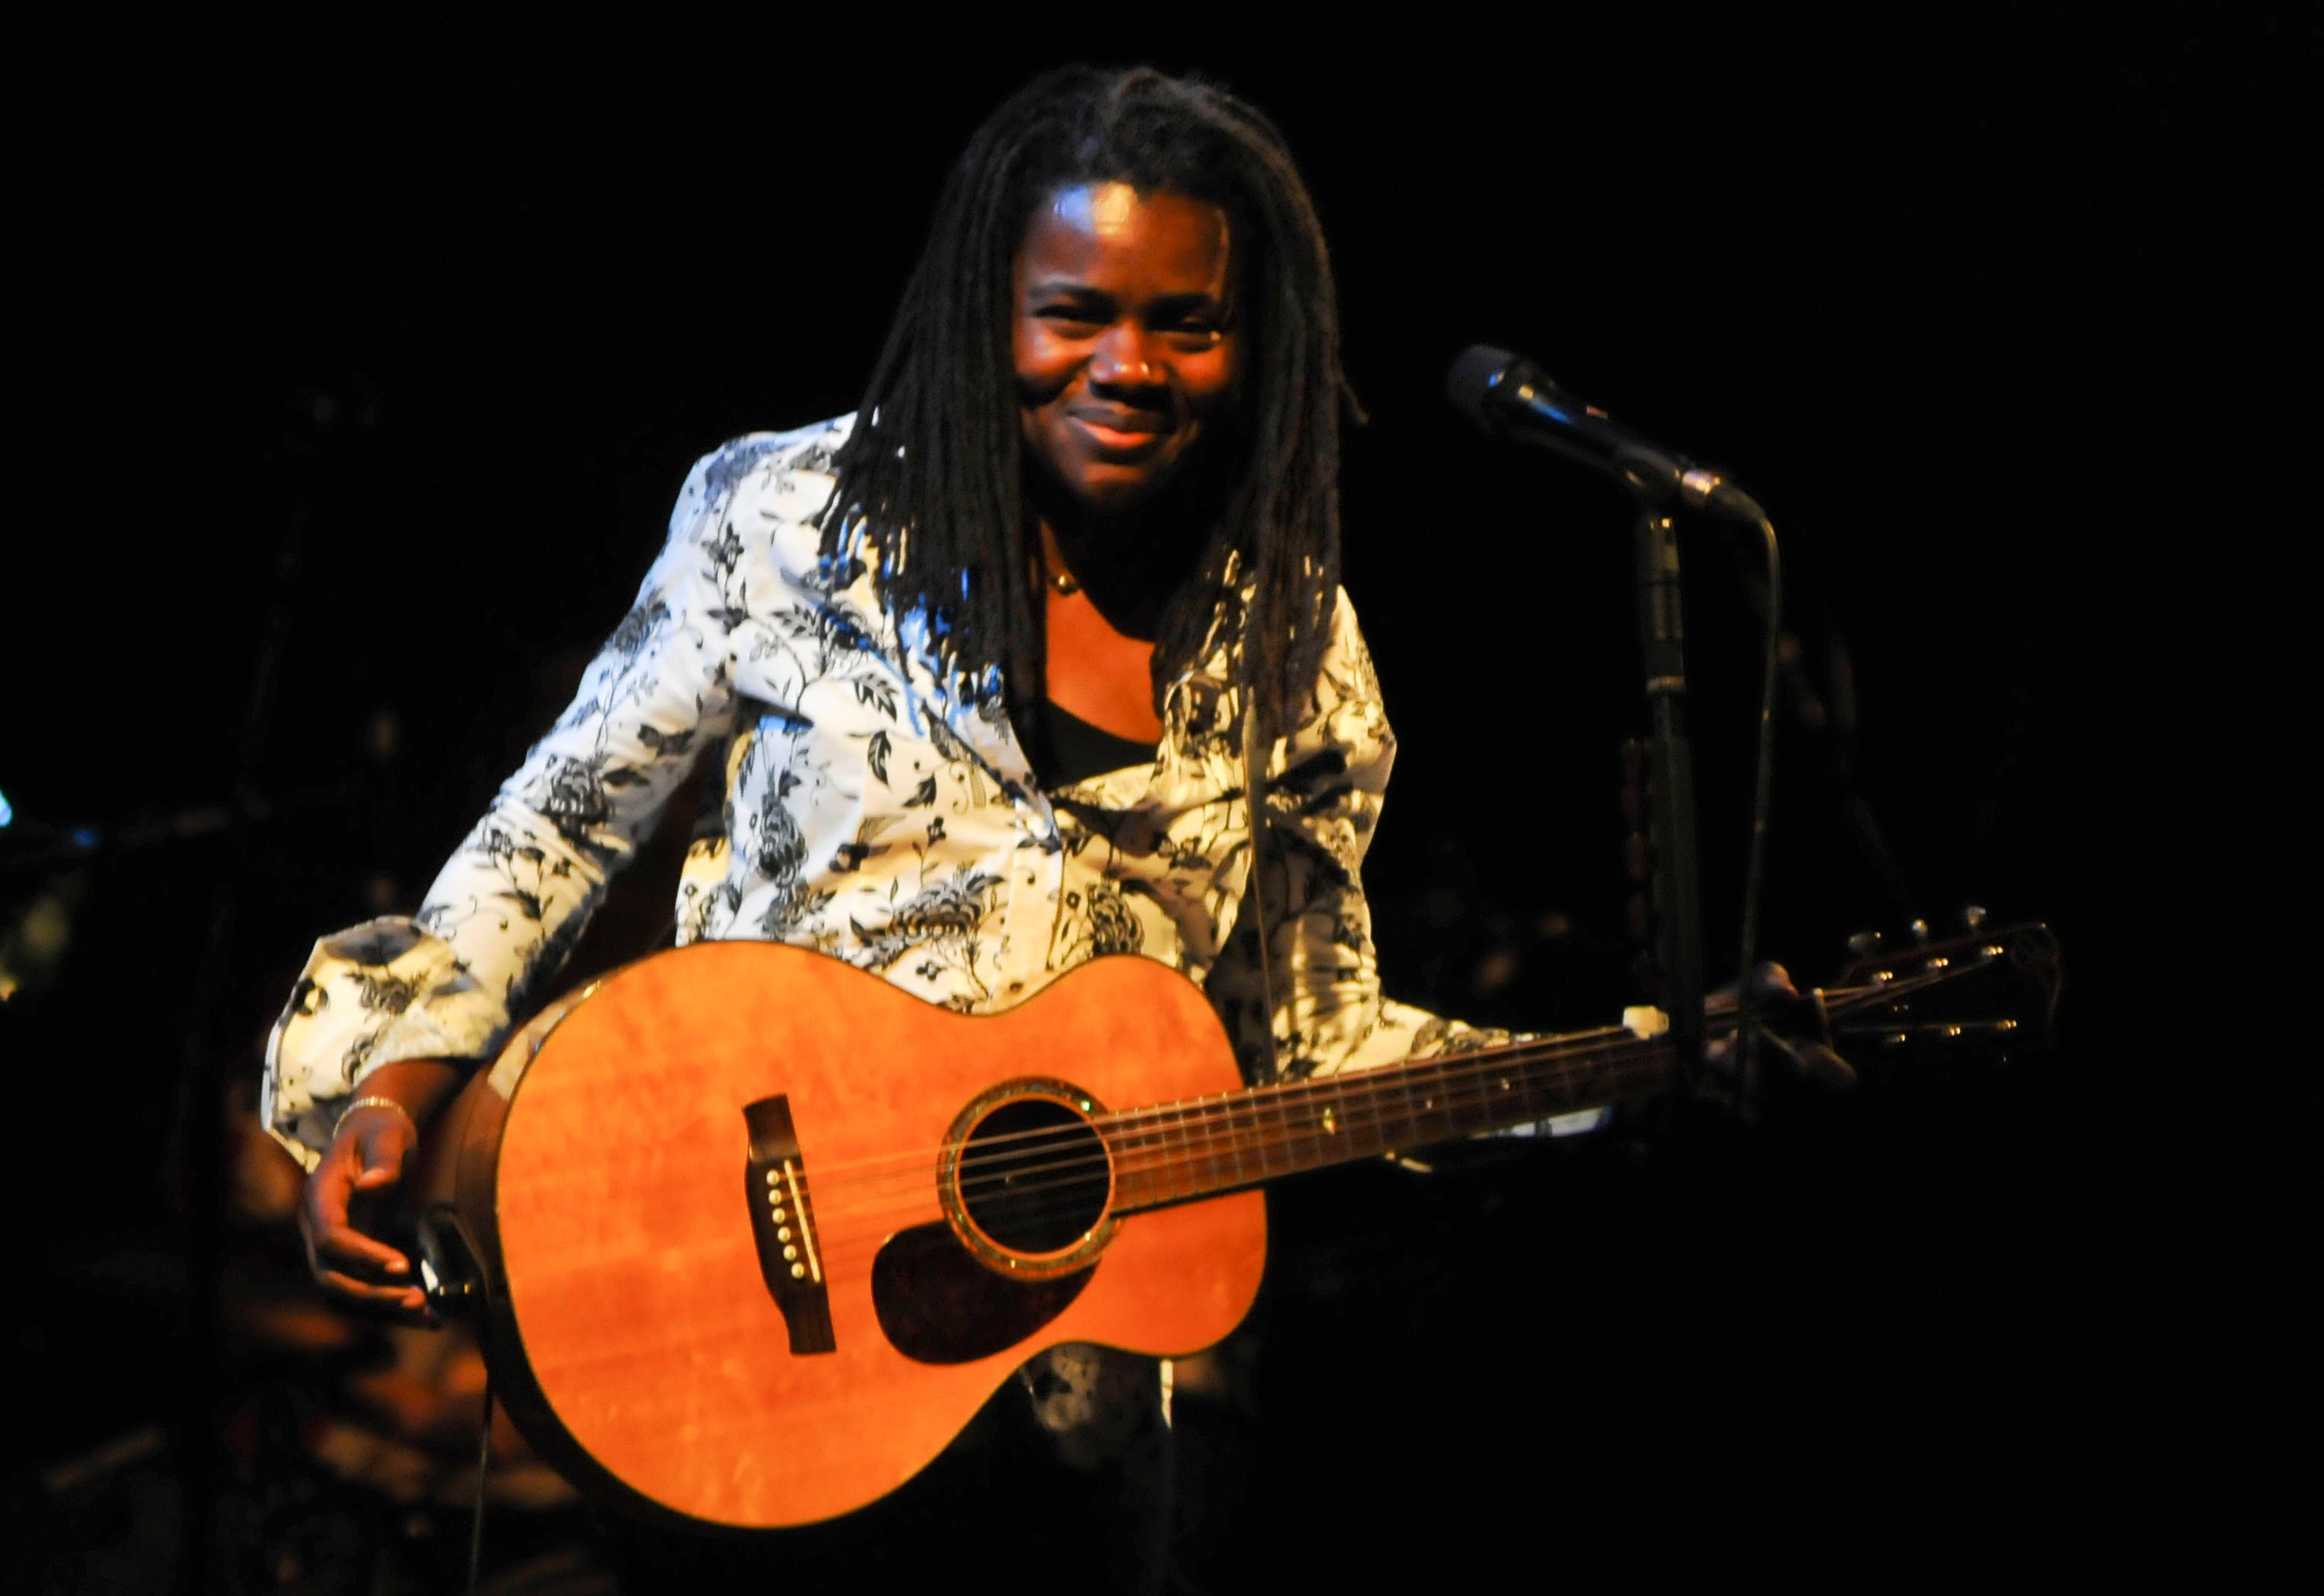 Tracy Chapman performs on stage at the Nice Jazz Festival on July 18, 2009 in Antibes, France.